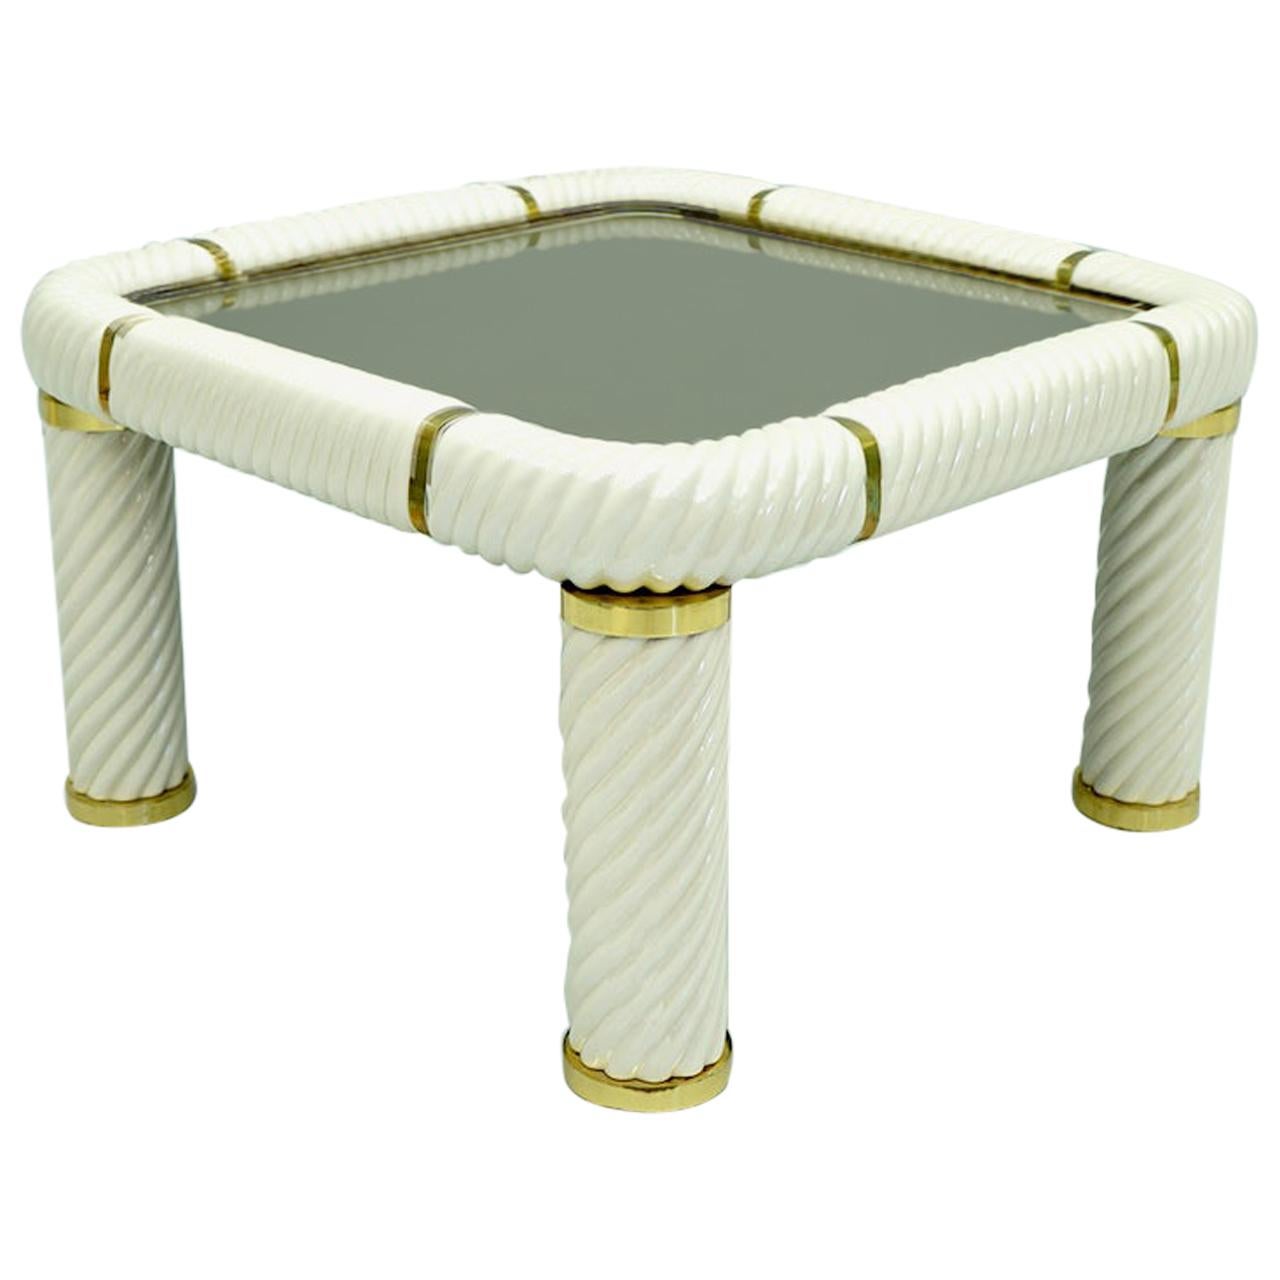 Tommaso Barbi Coffee Table in Ceramic, Brass and Glass, Italy, 1970s